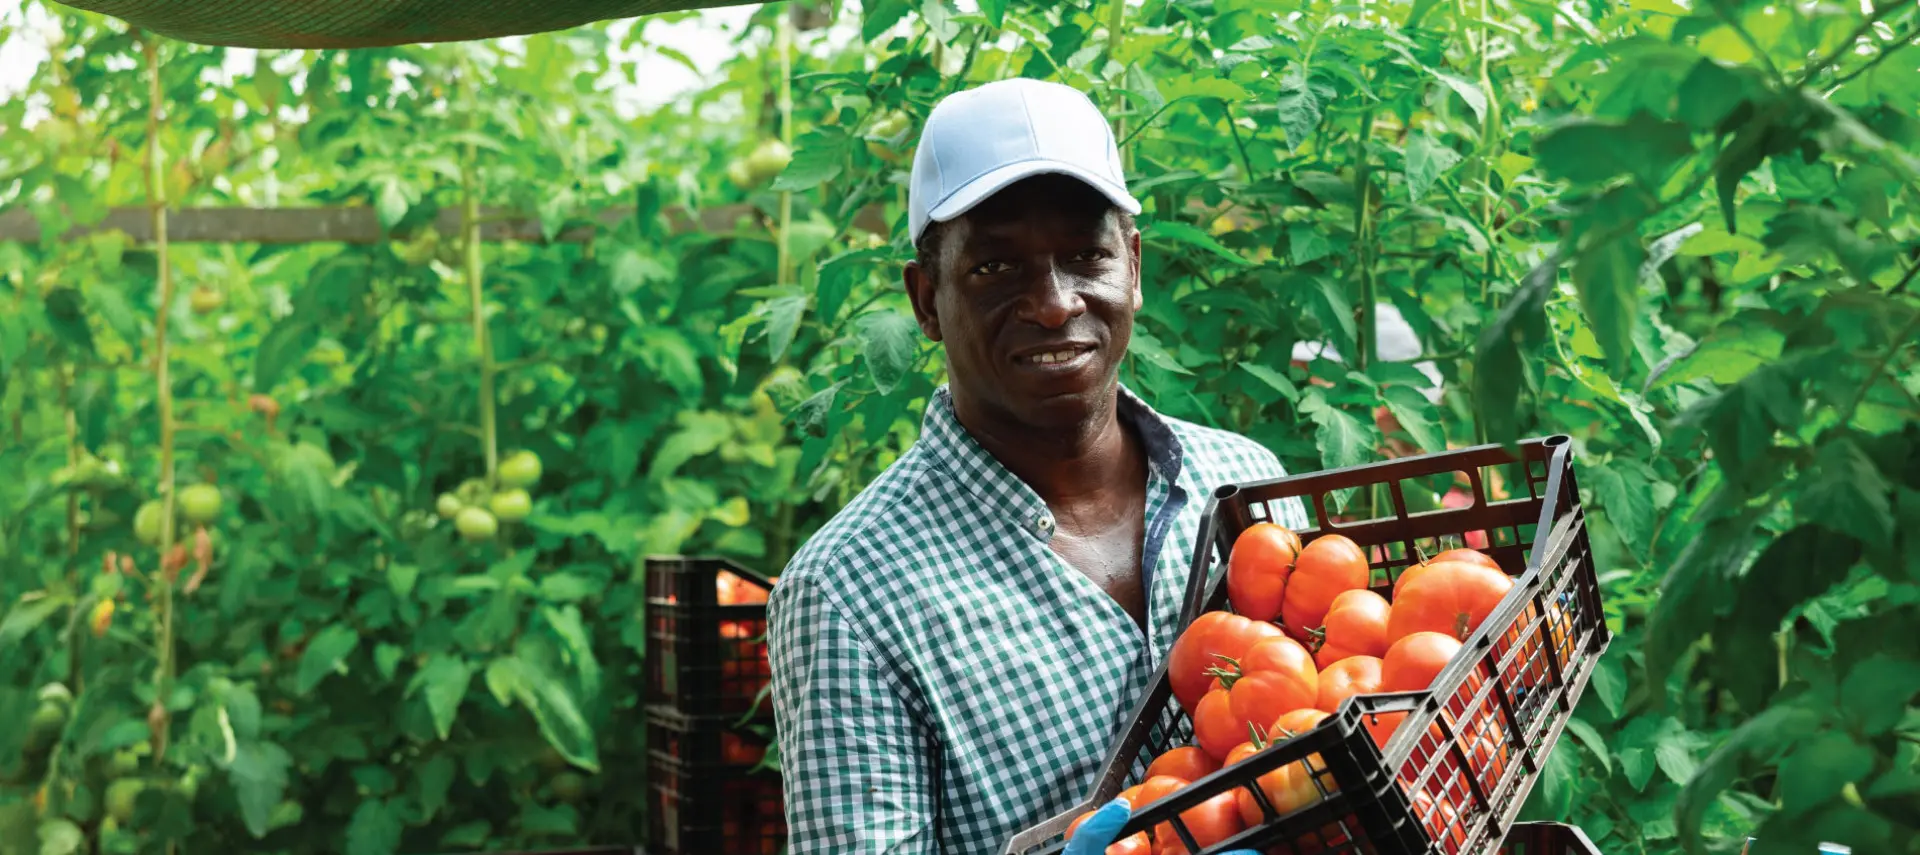 Image of a tomatoes farmer